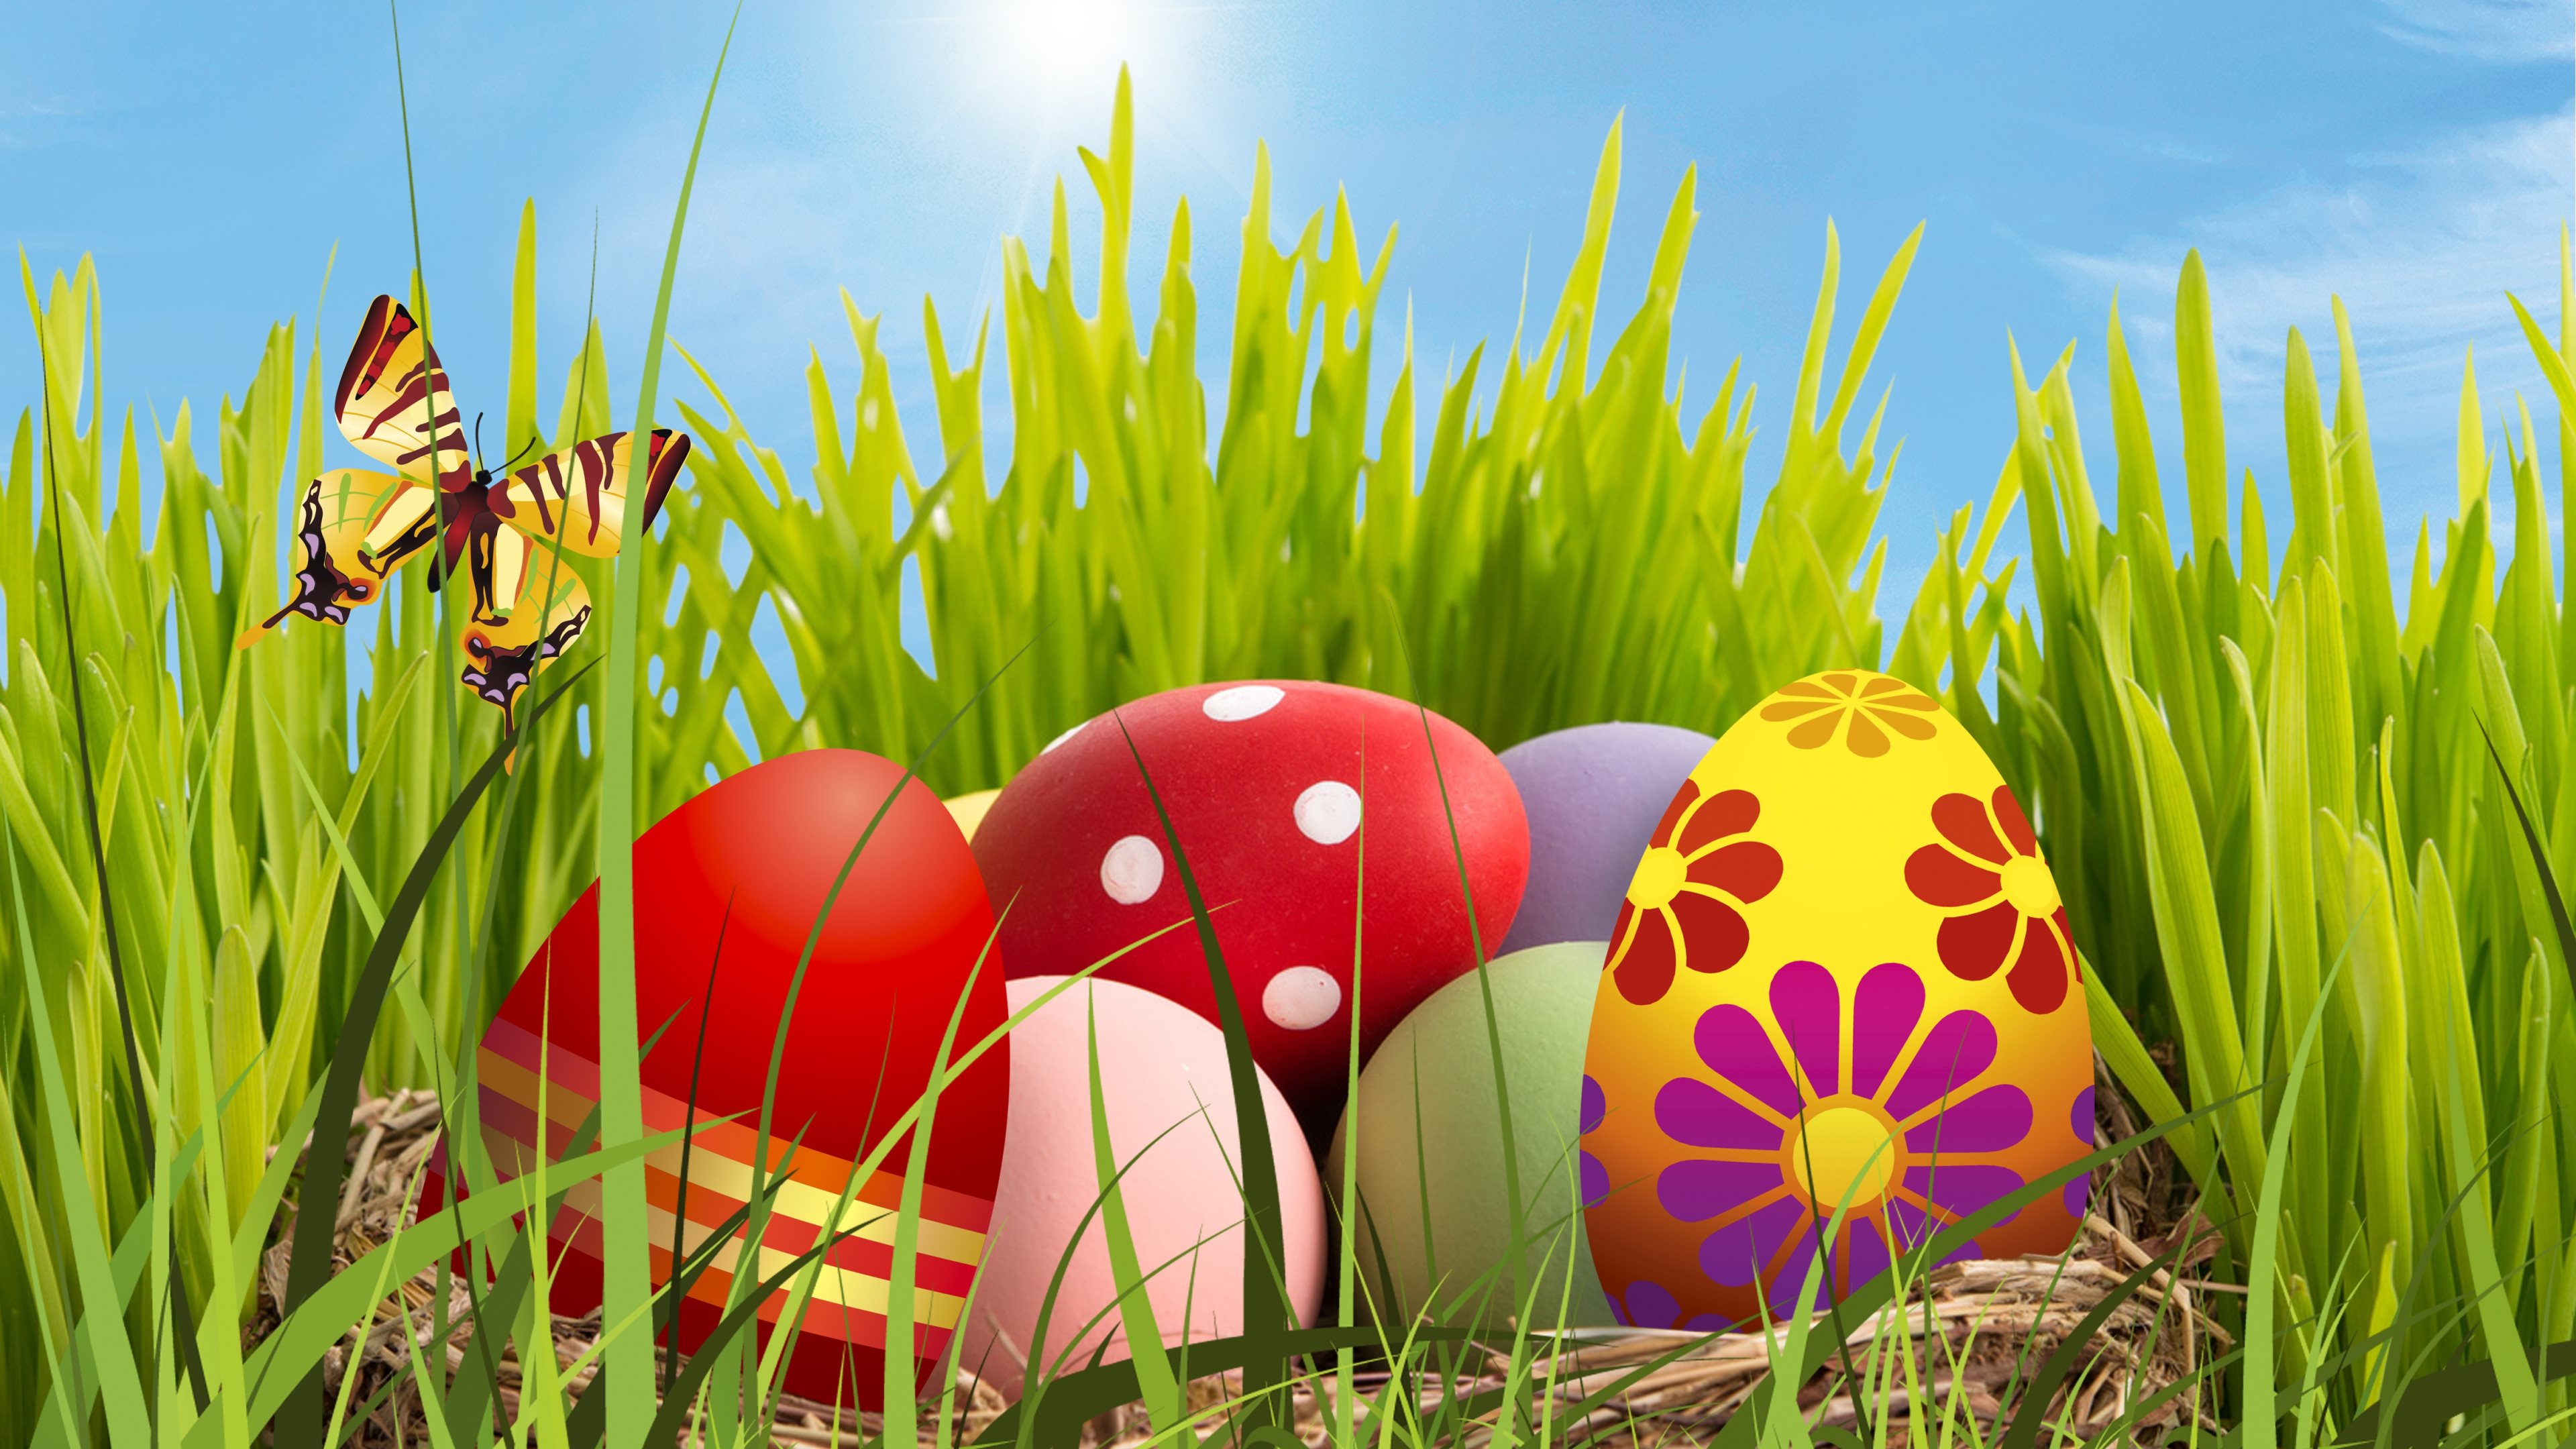 Easter Eggs In The Grass 4k Ultra HD Wallpaper Background Image